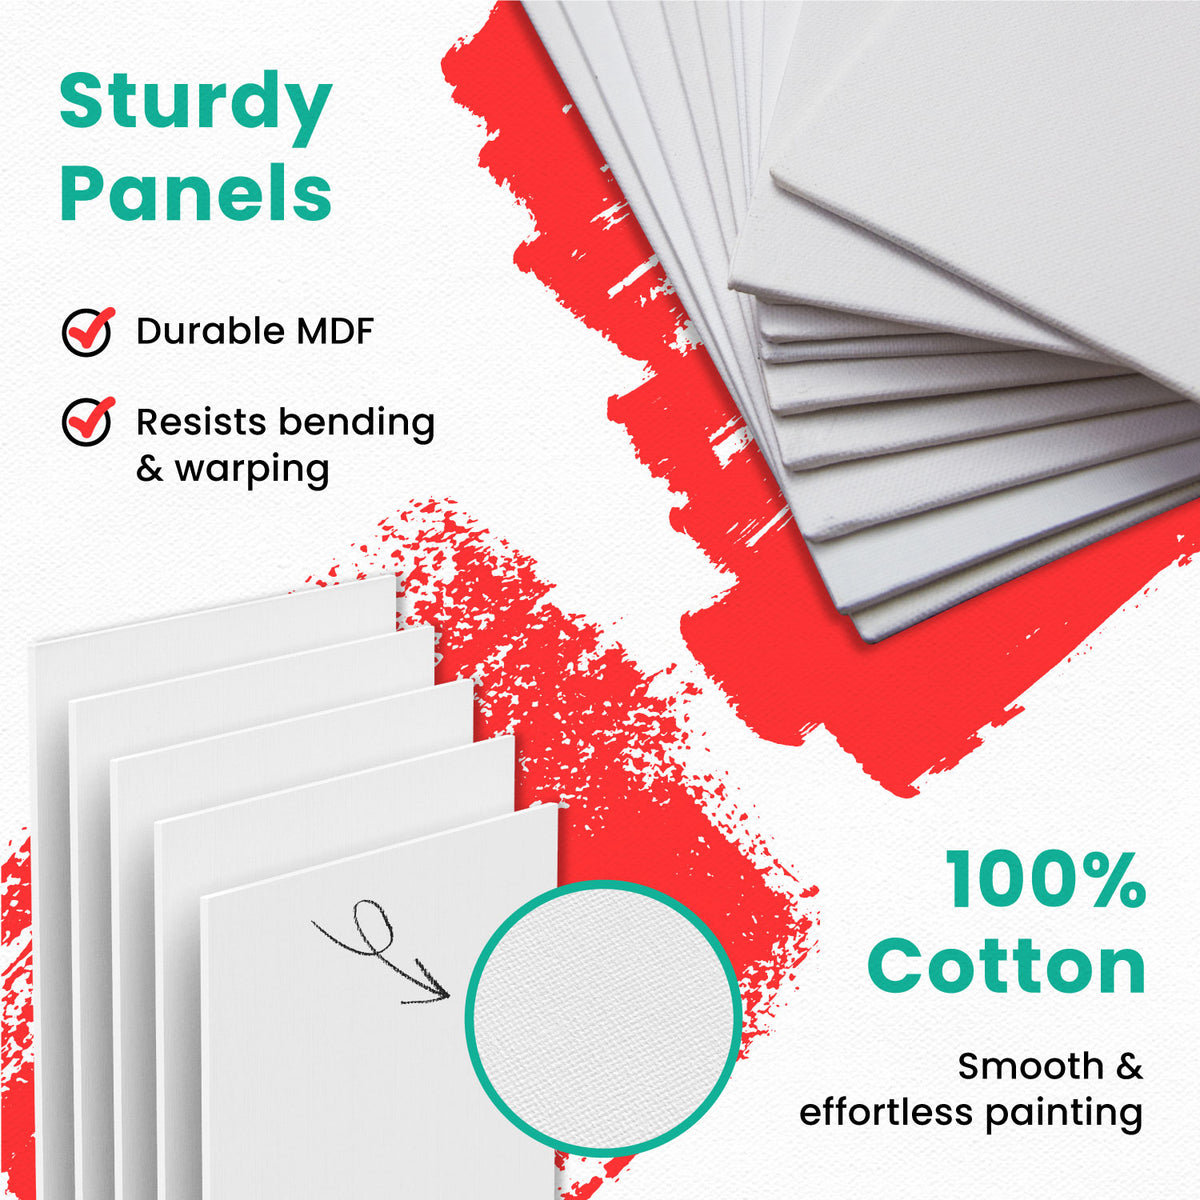 Painting Canvas Panels | 5x7 inch (15 Pack)